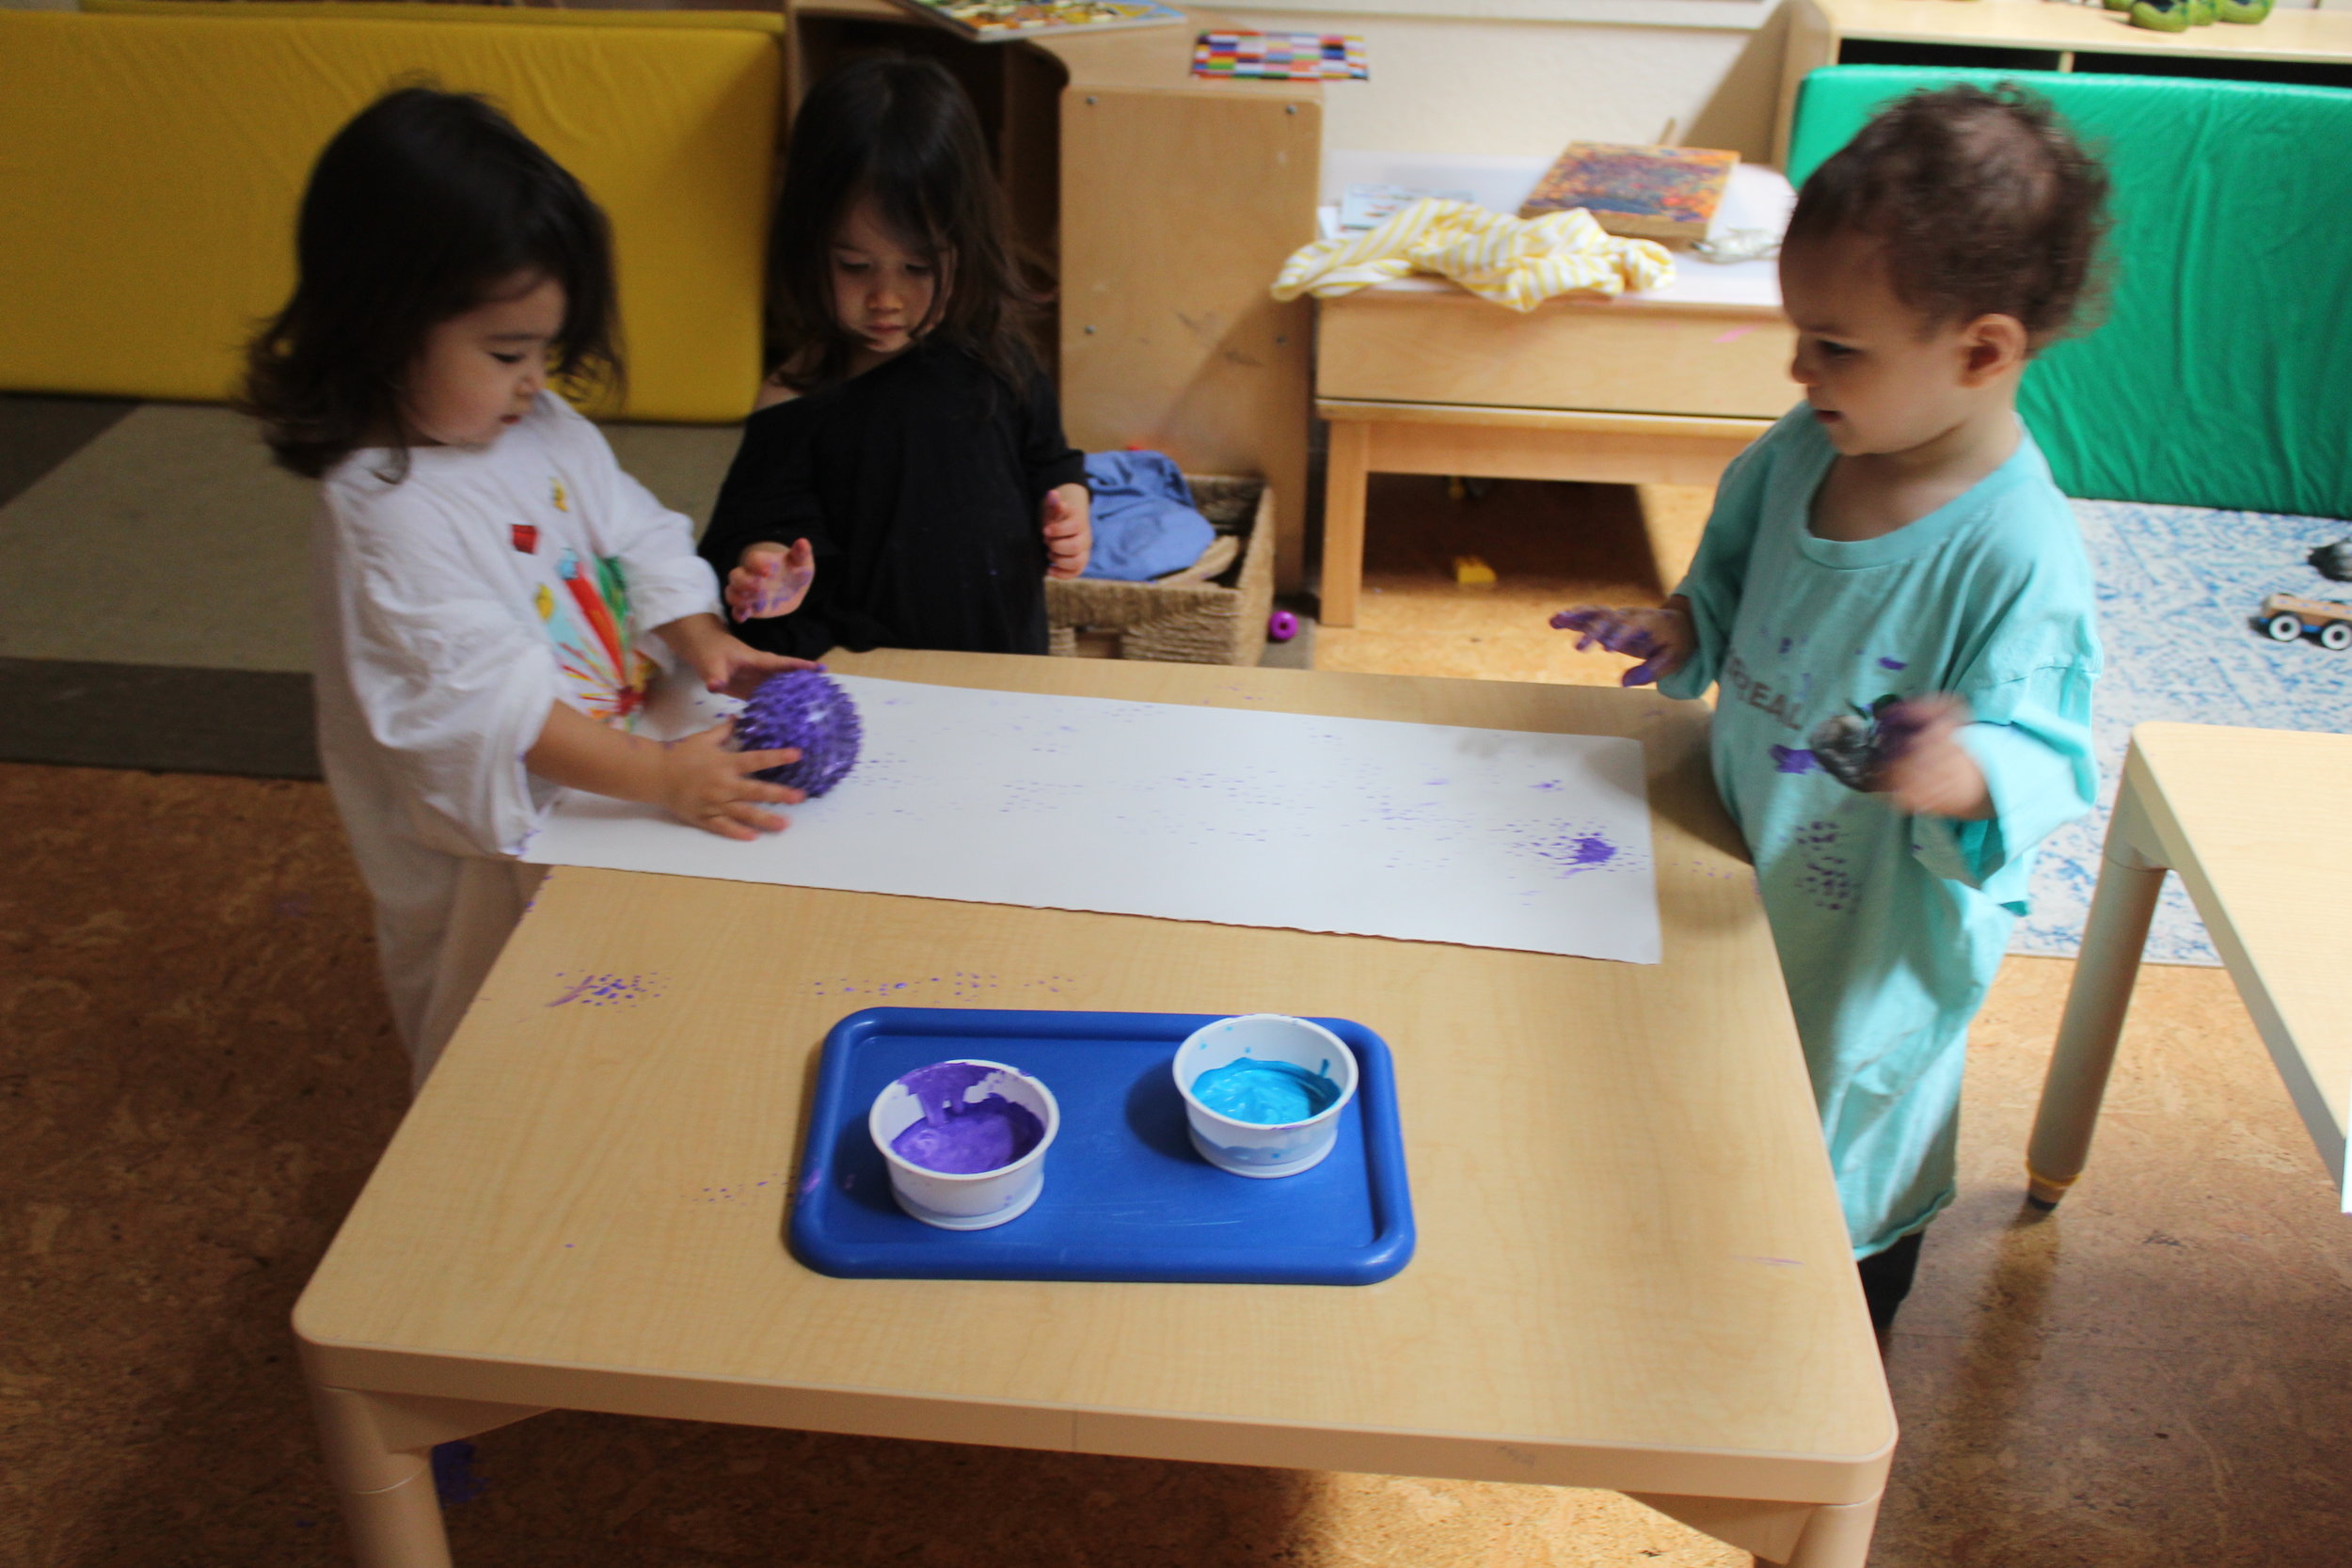  Painting with balls creates a different kind of texture on paper, as the children roll the ball back and forth. They are learning about color, texture, and creating art. 